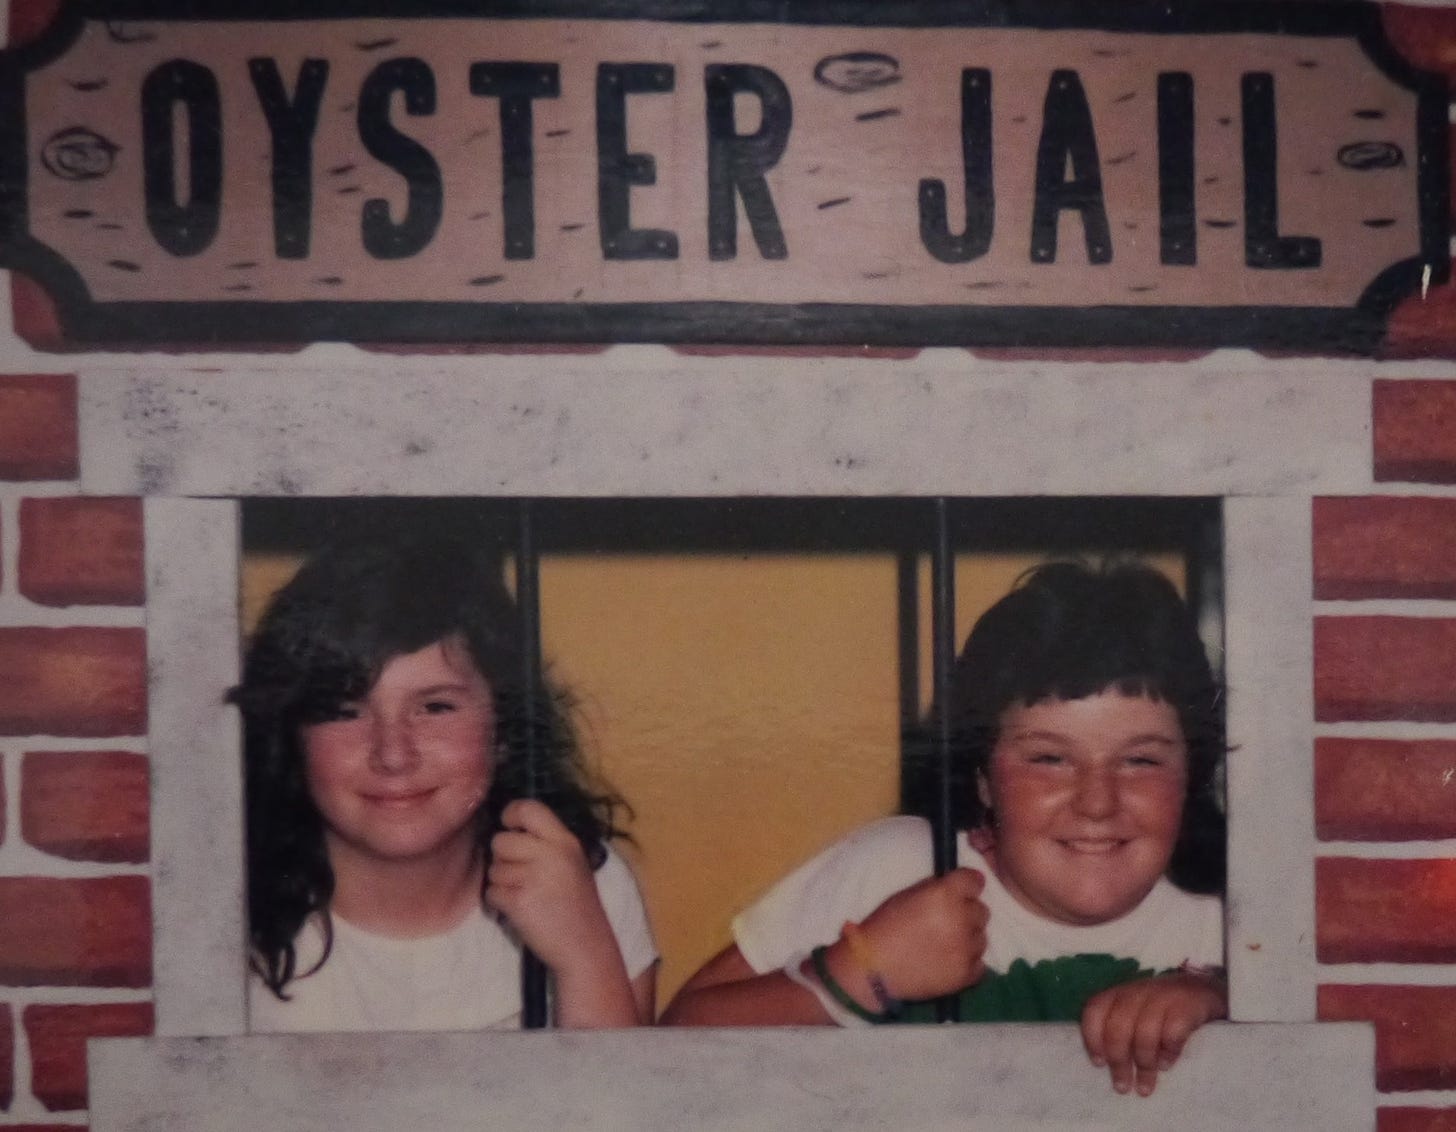 Chris and MaryJo, 1985 Oyster Festival, Milford, CT